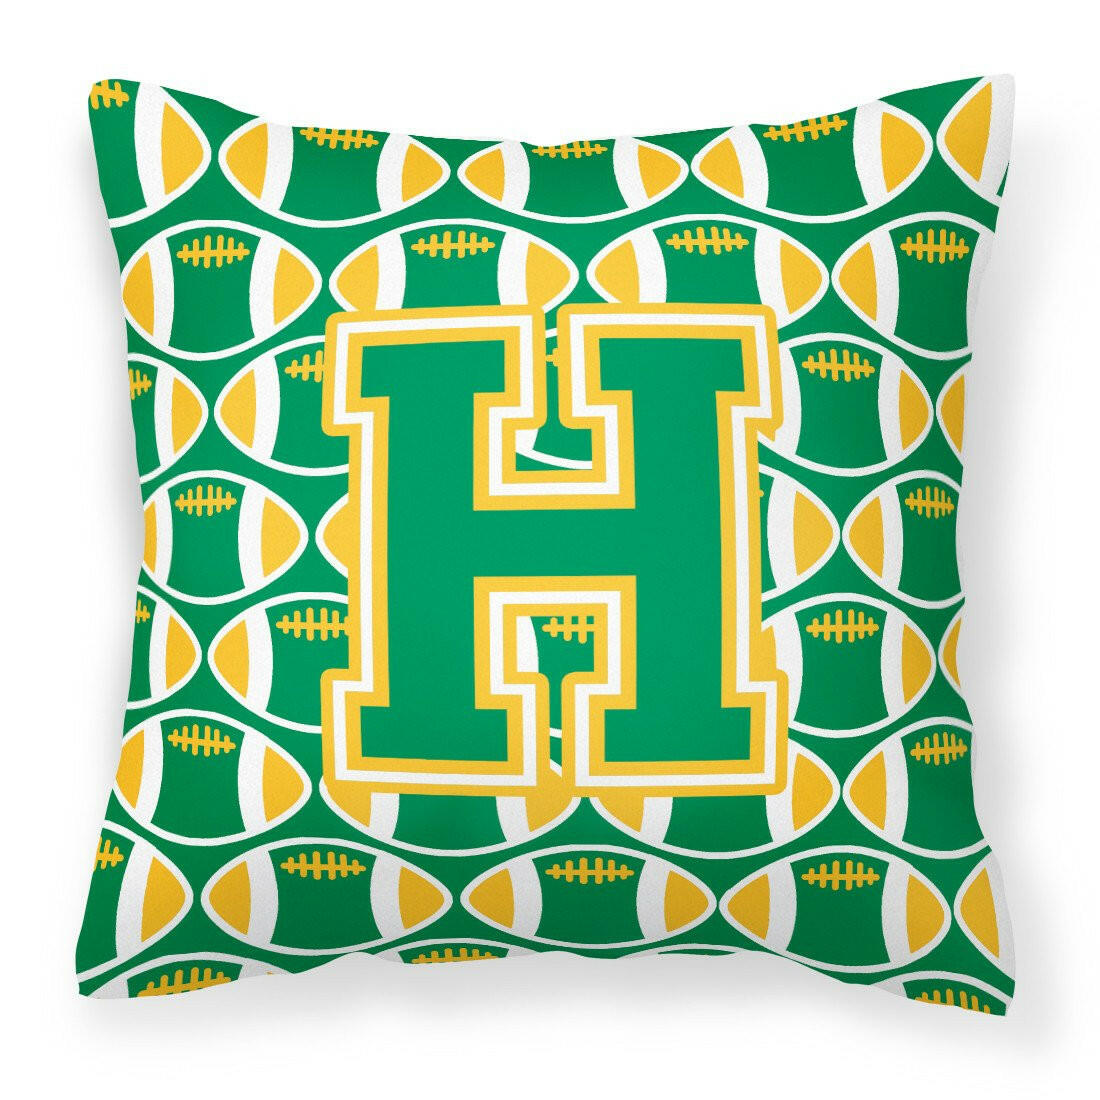 Letter H Football Green and Gold Fabric Decorative Pillow CJ1069-HPW1414 by Caroline's Treasures